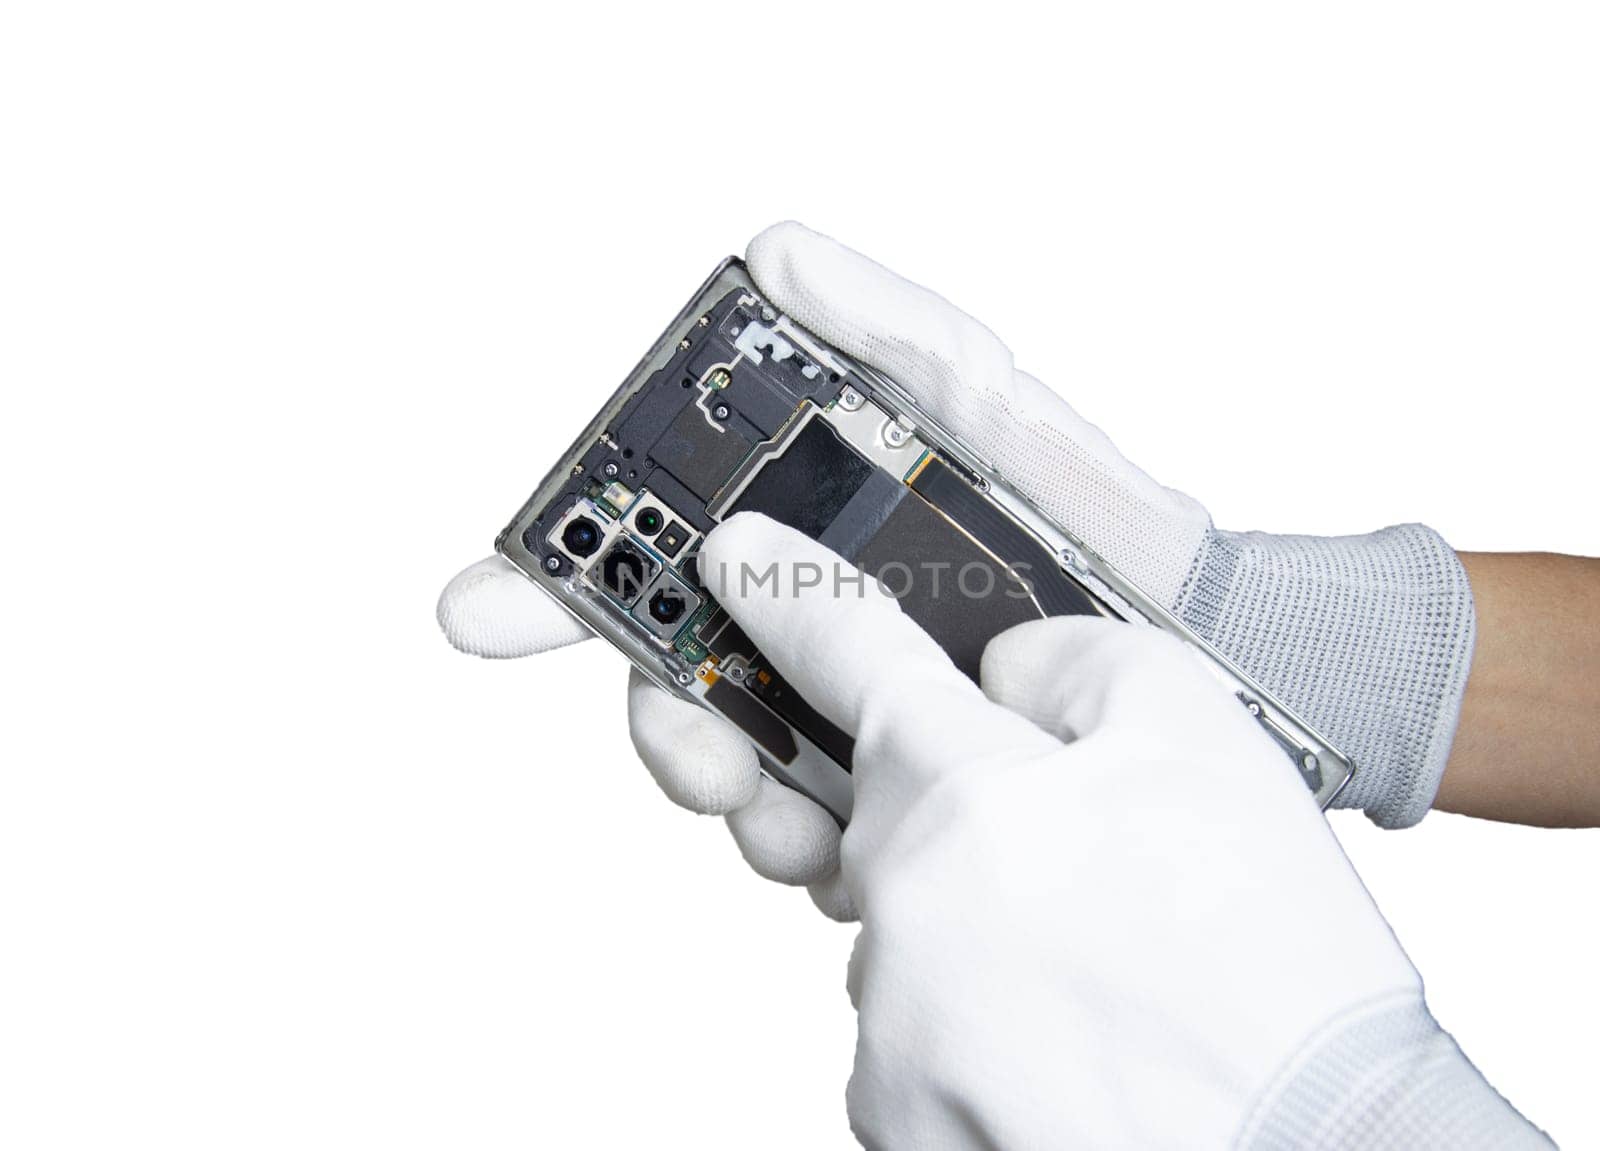 Image of a smartphone removed from the back, smartphone repair by boonruen